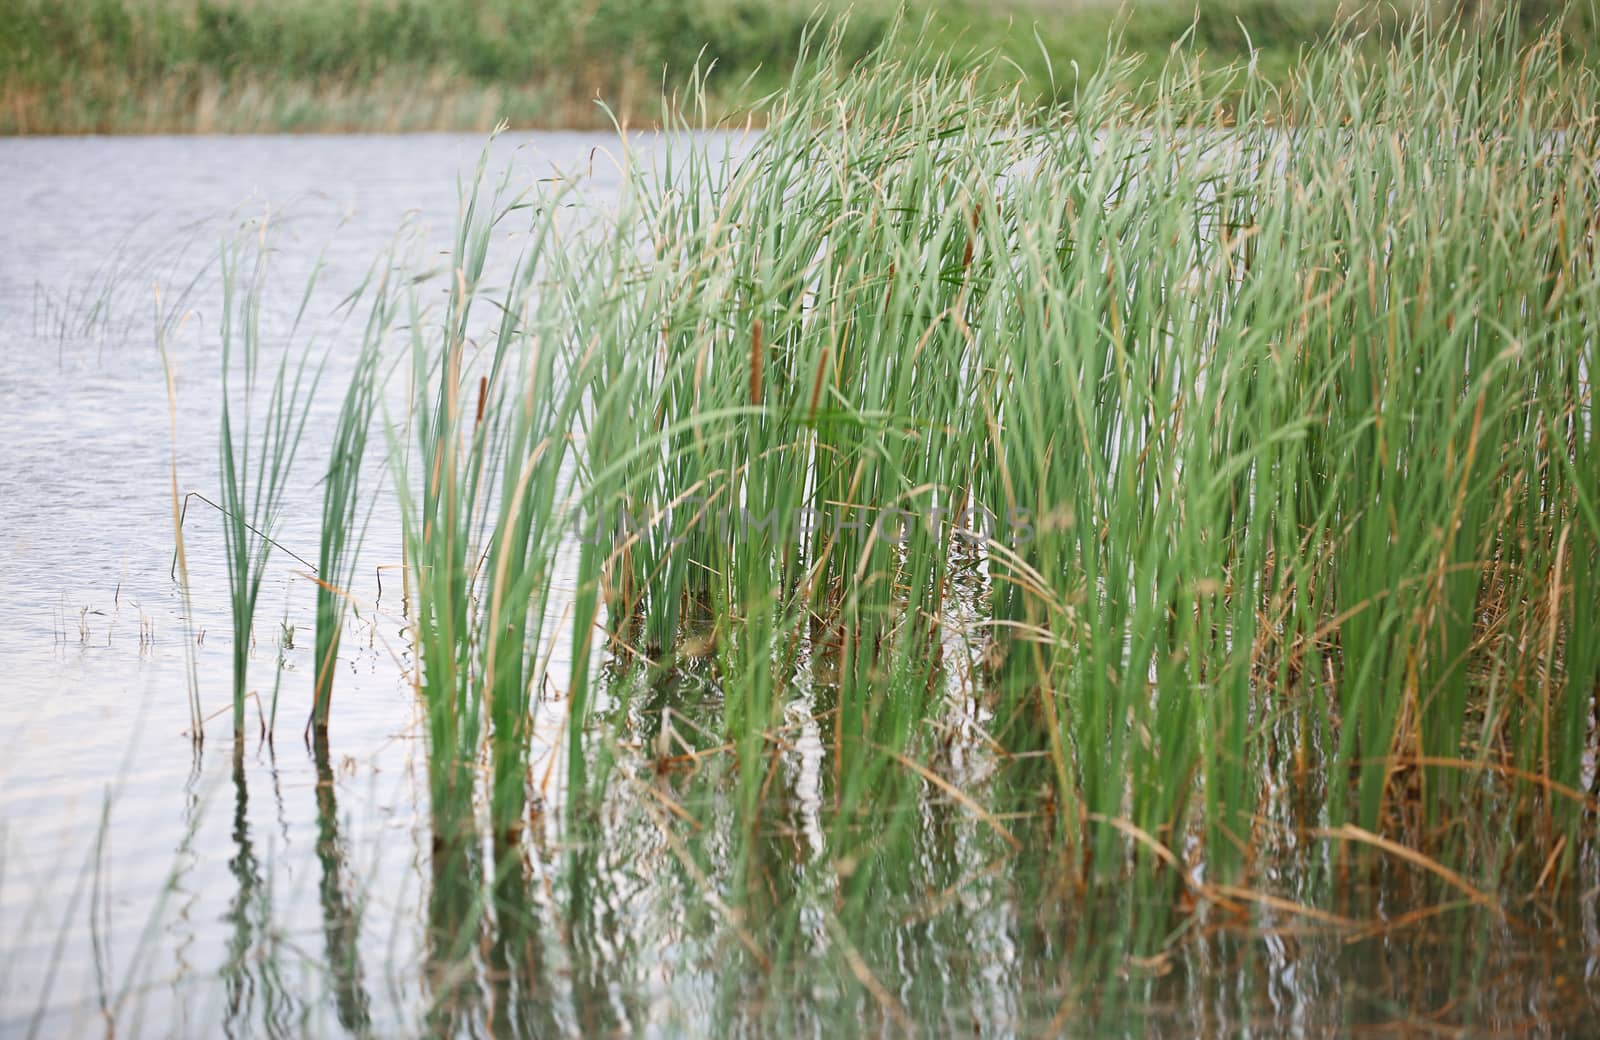 Reed plants in open water of the Florida lake by Novic